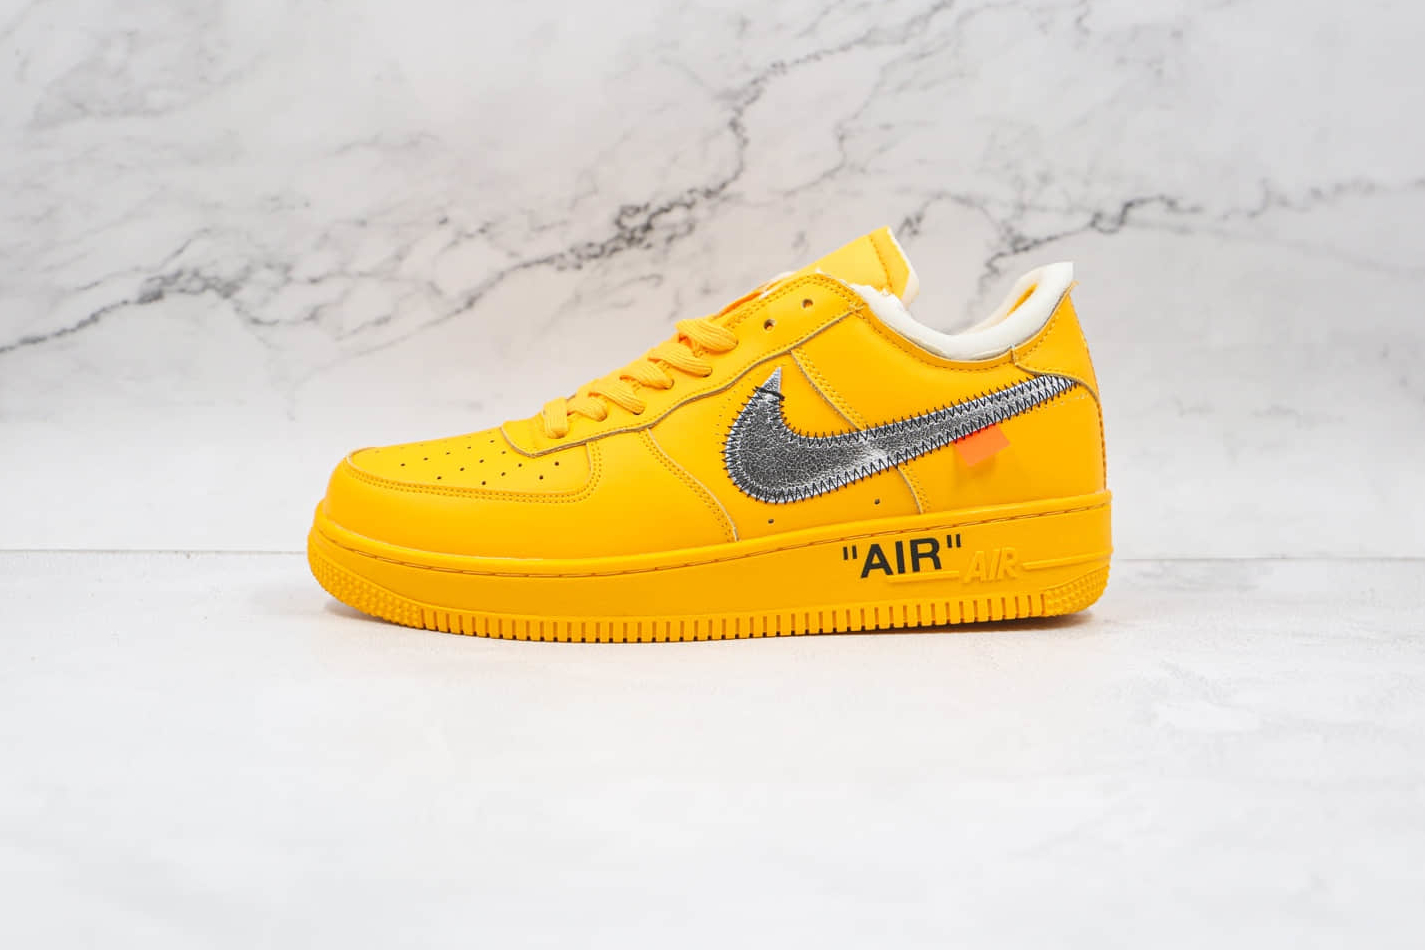 Nike Off-White x Air Force 1 Low 'Lemonade' DD1876-700 - Limited Edition Sneakers